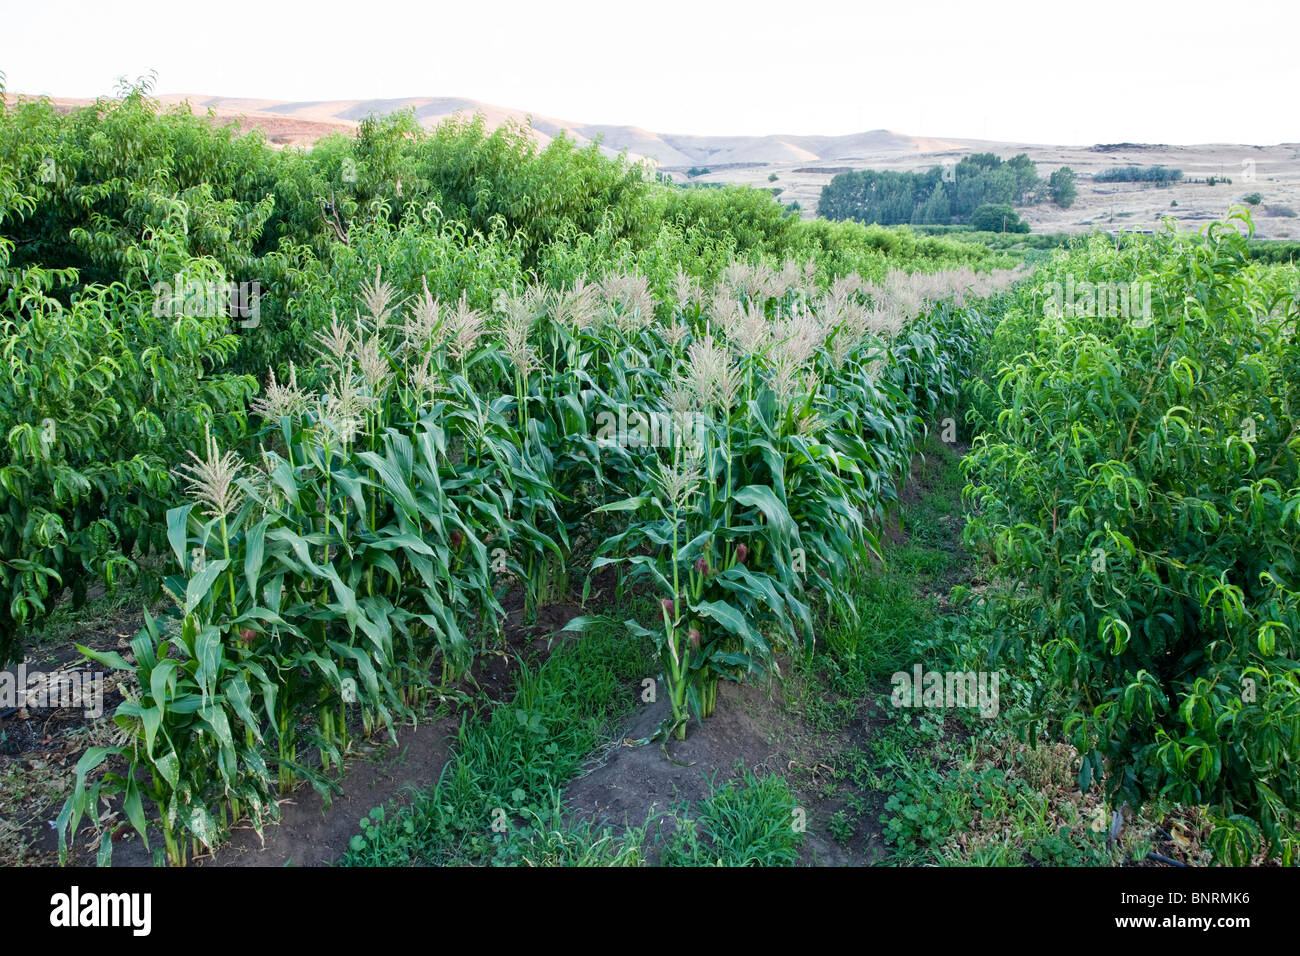 Intercropping, Peach orchard with Corn tassling stage. Stock Photo